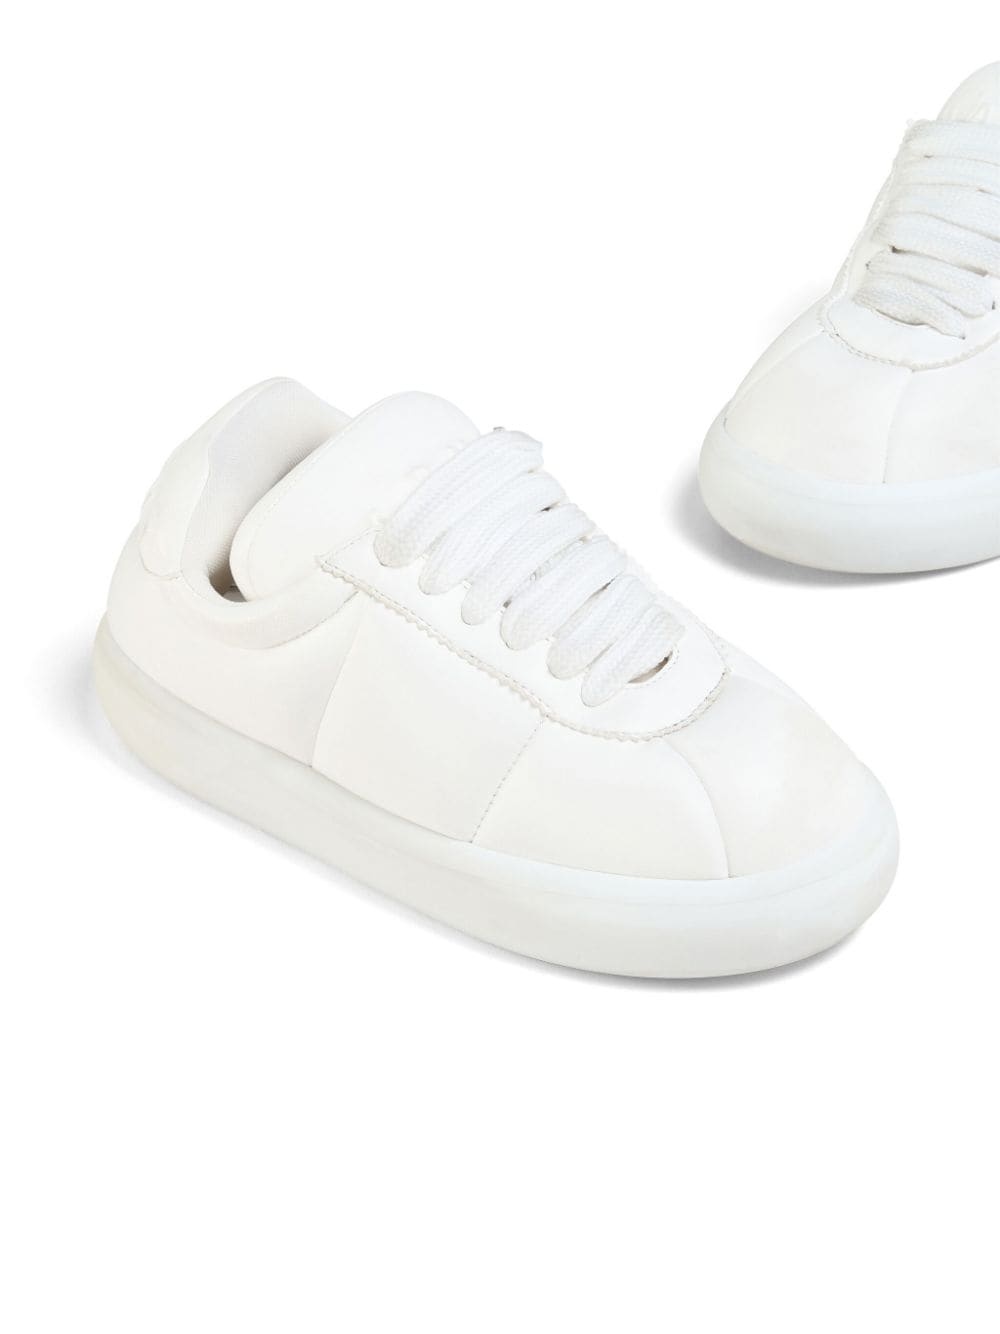 padded lace-up sneakers - 5